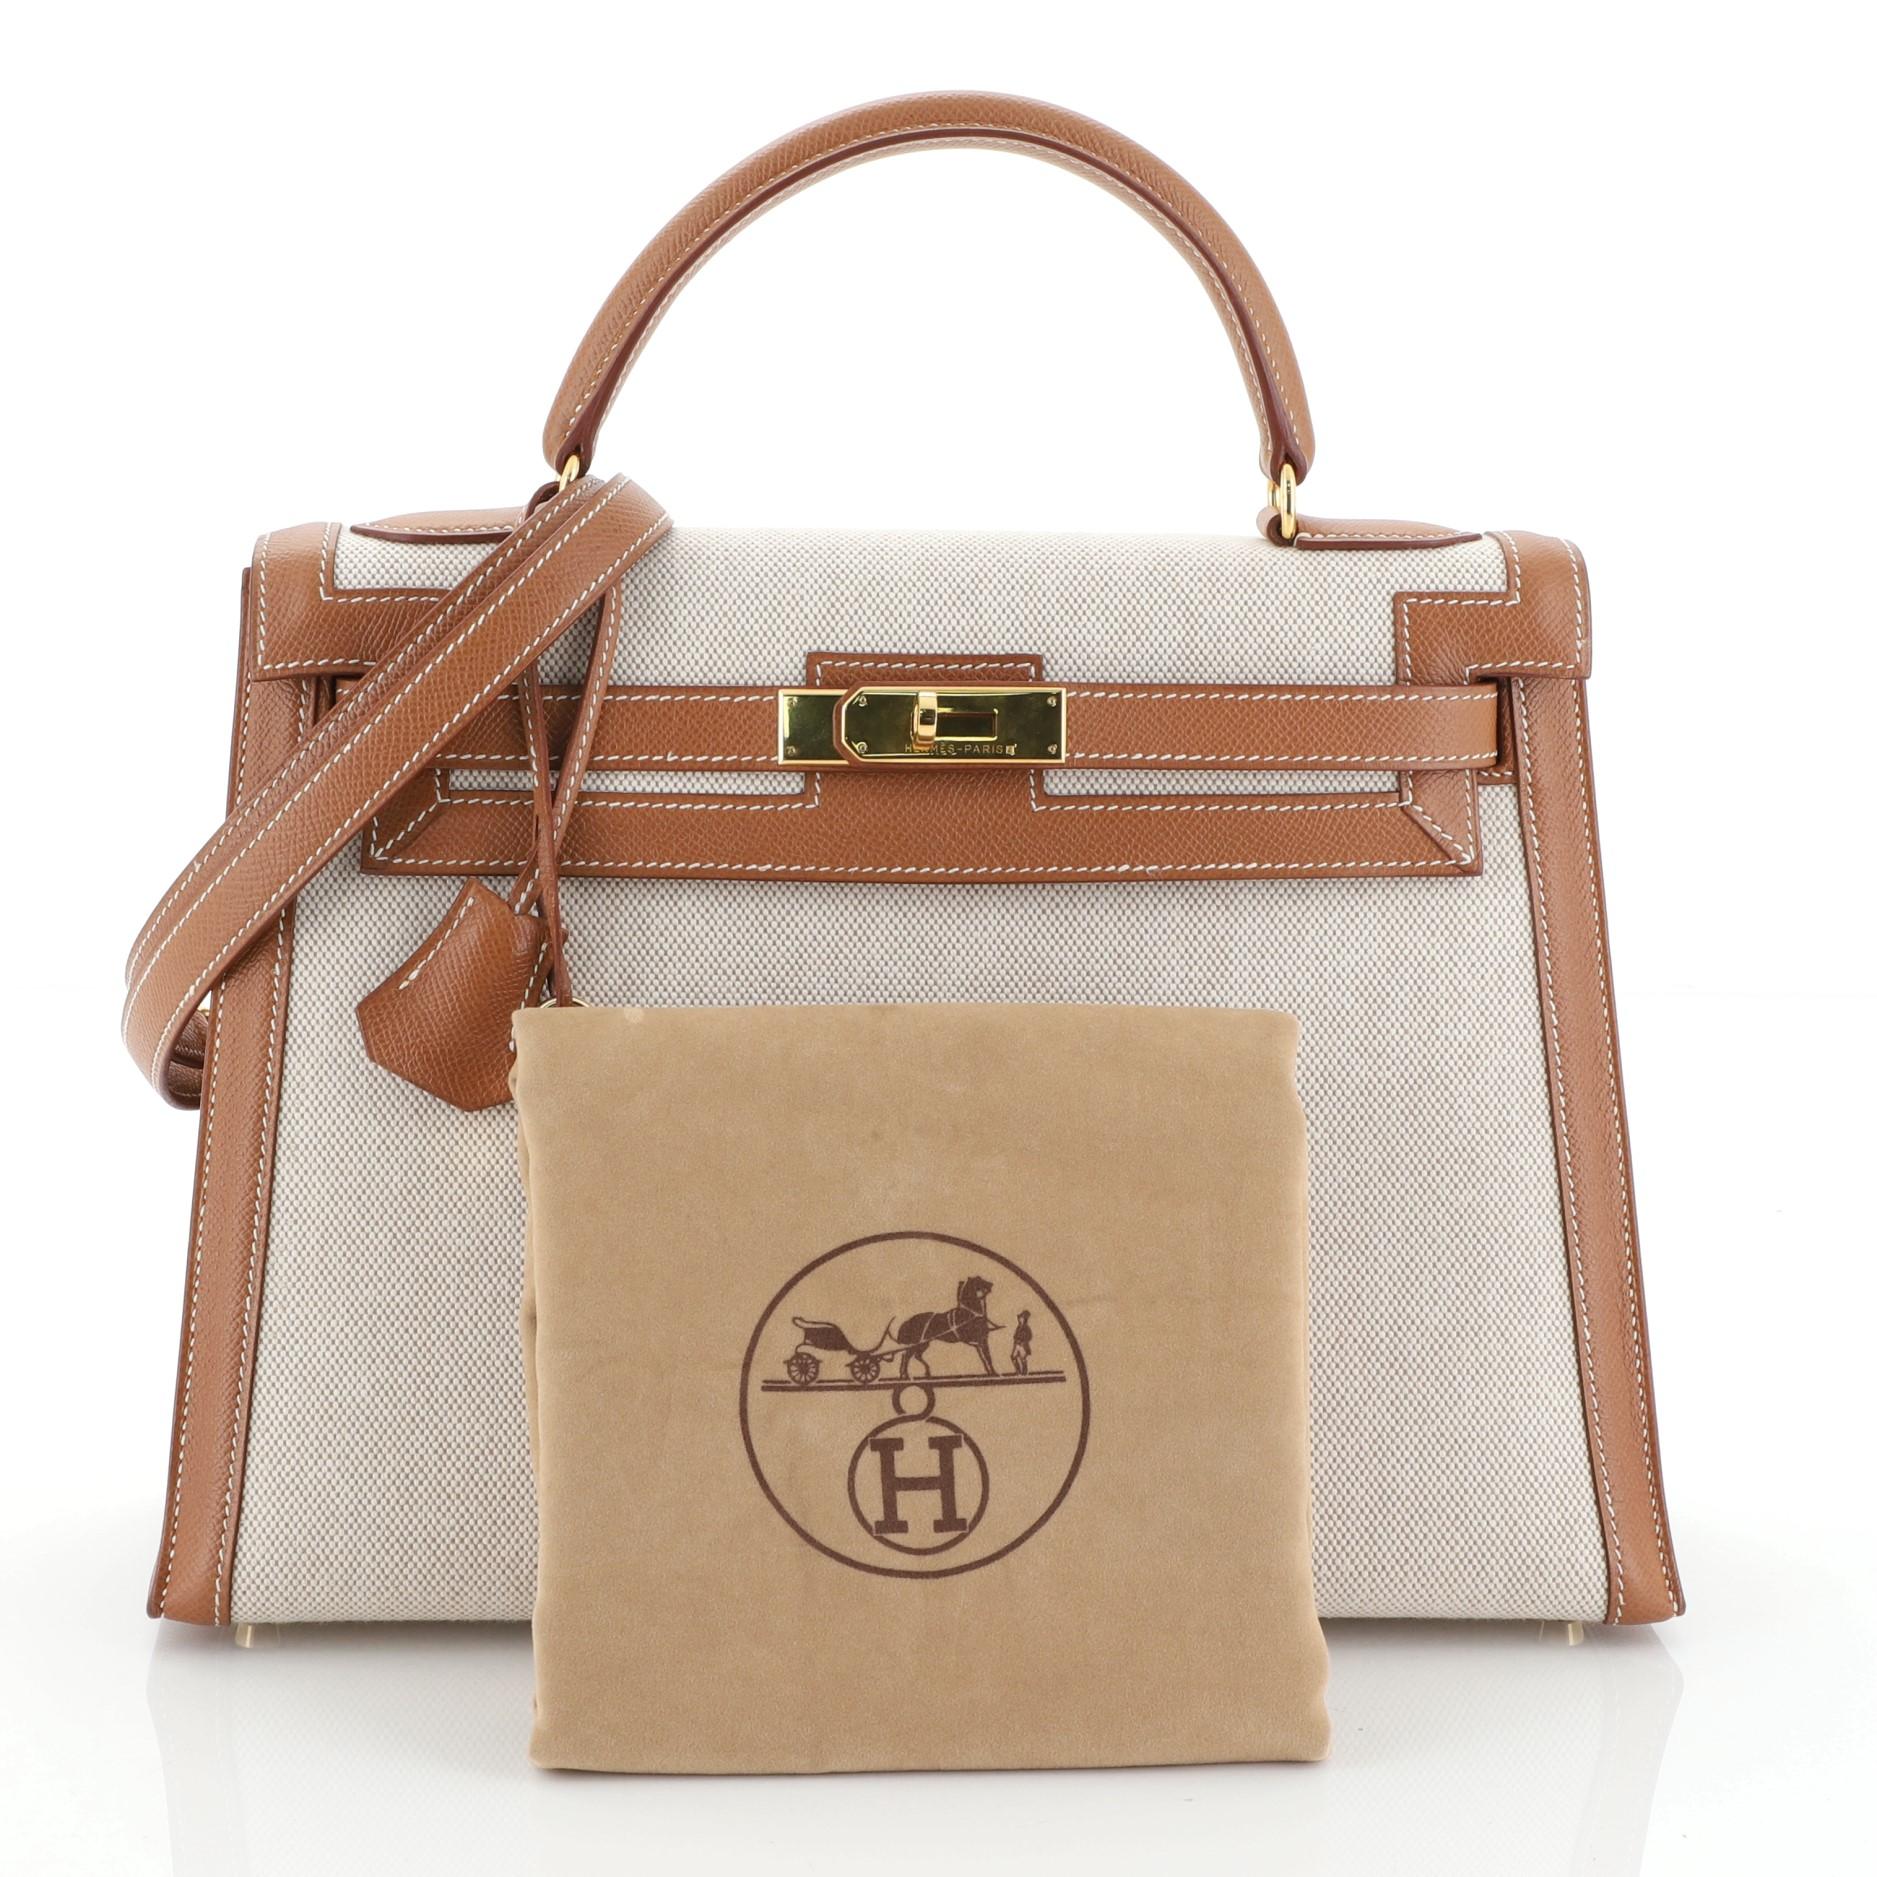 This Hermes Kelly Handbag Ecru Toile and Gold Courchevel with Gold Hardware 32, crafted in Ecru neutral Toile H and Gold brown Courchevel leather, features a single rolled top handle, protective base studs, and gold hardware. Its turn-lock closure